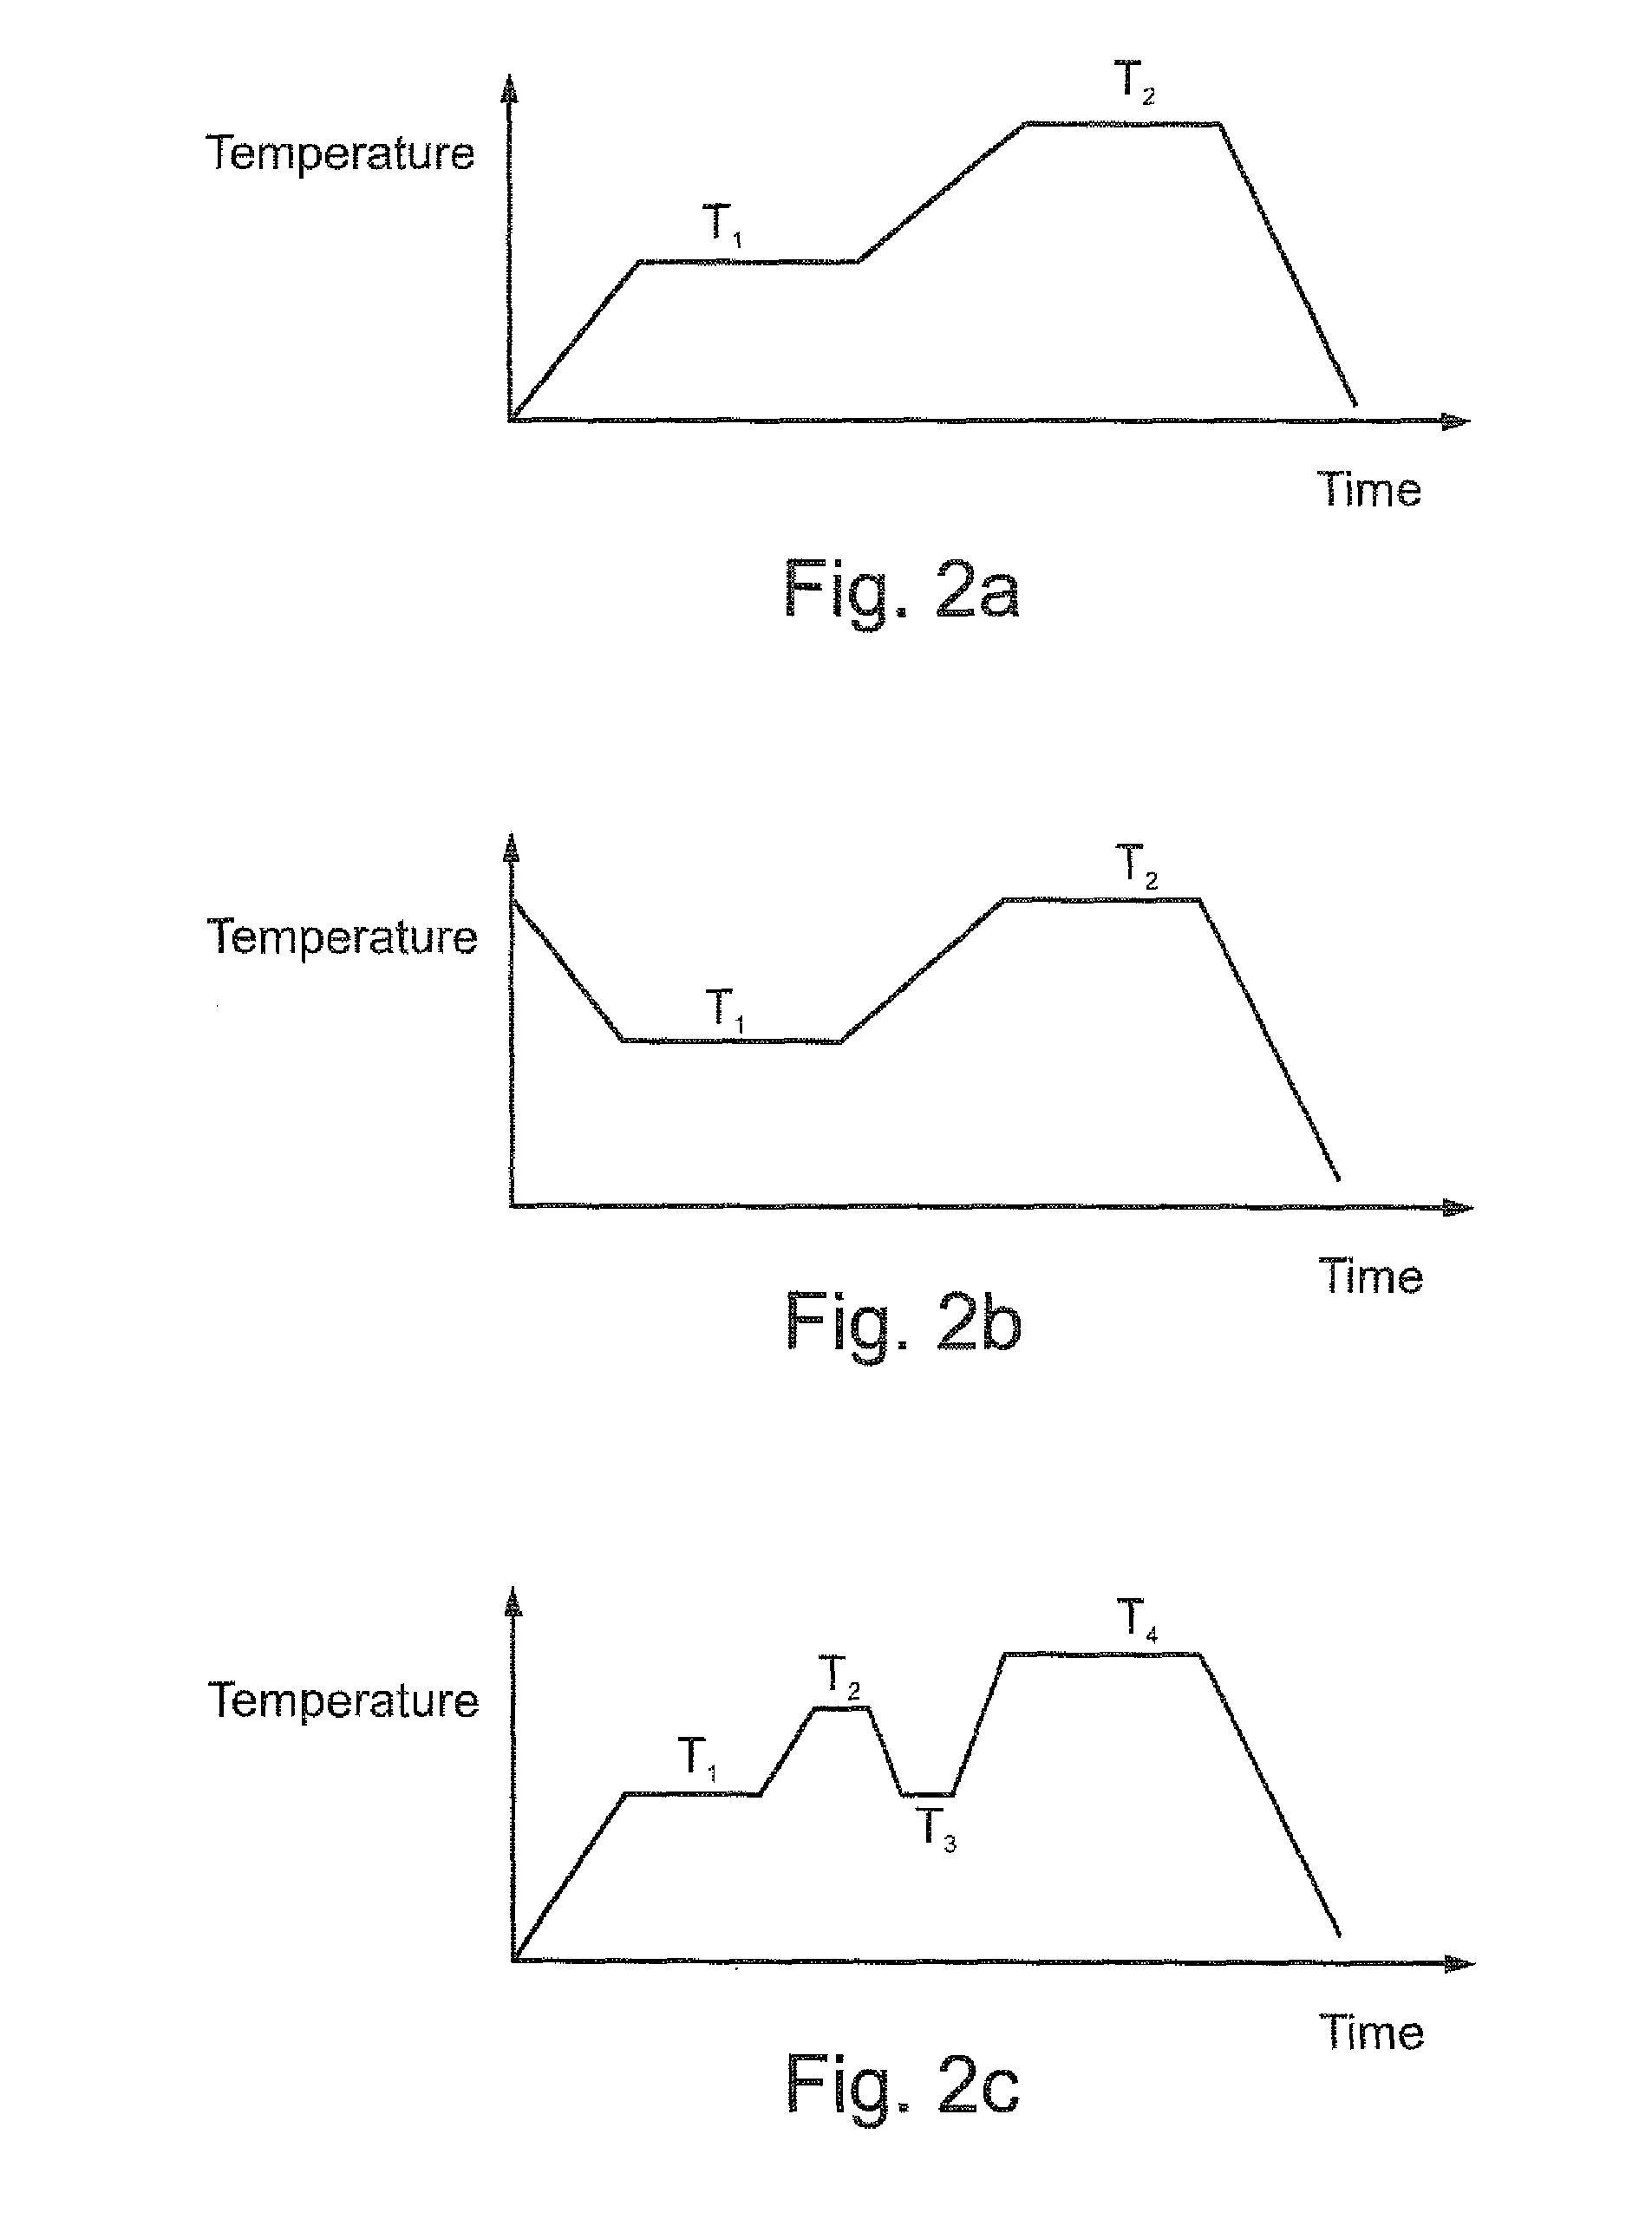 Glass-ceramic materials having a predominant spinel-group crystal phase